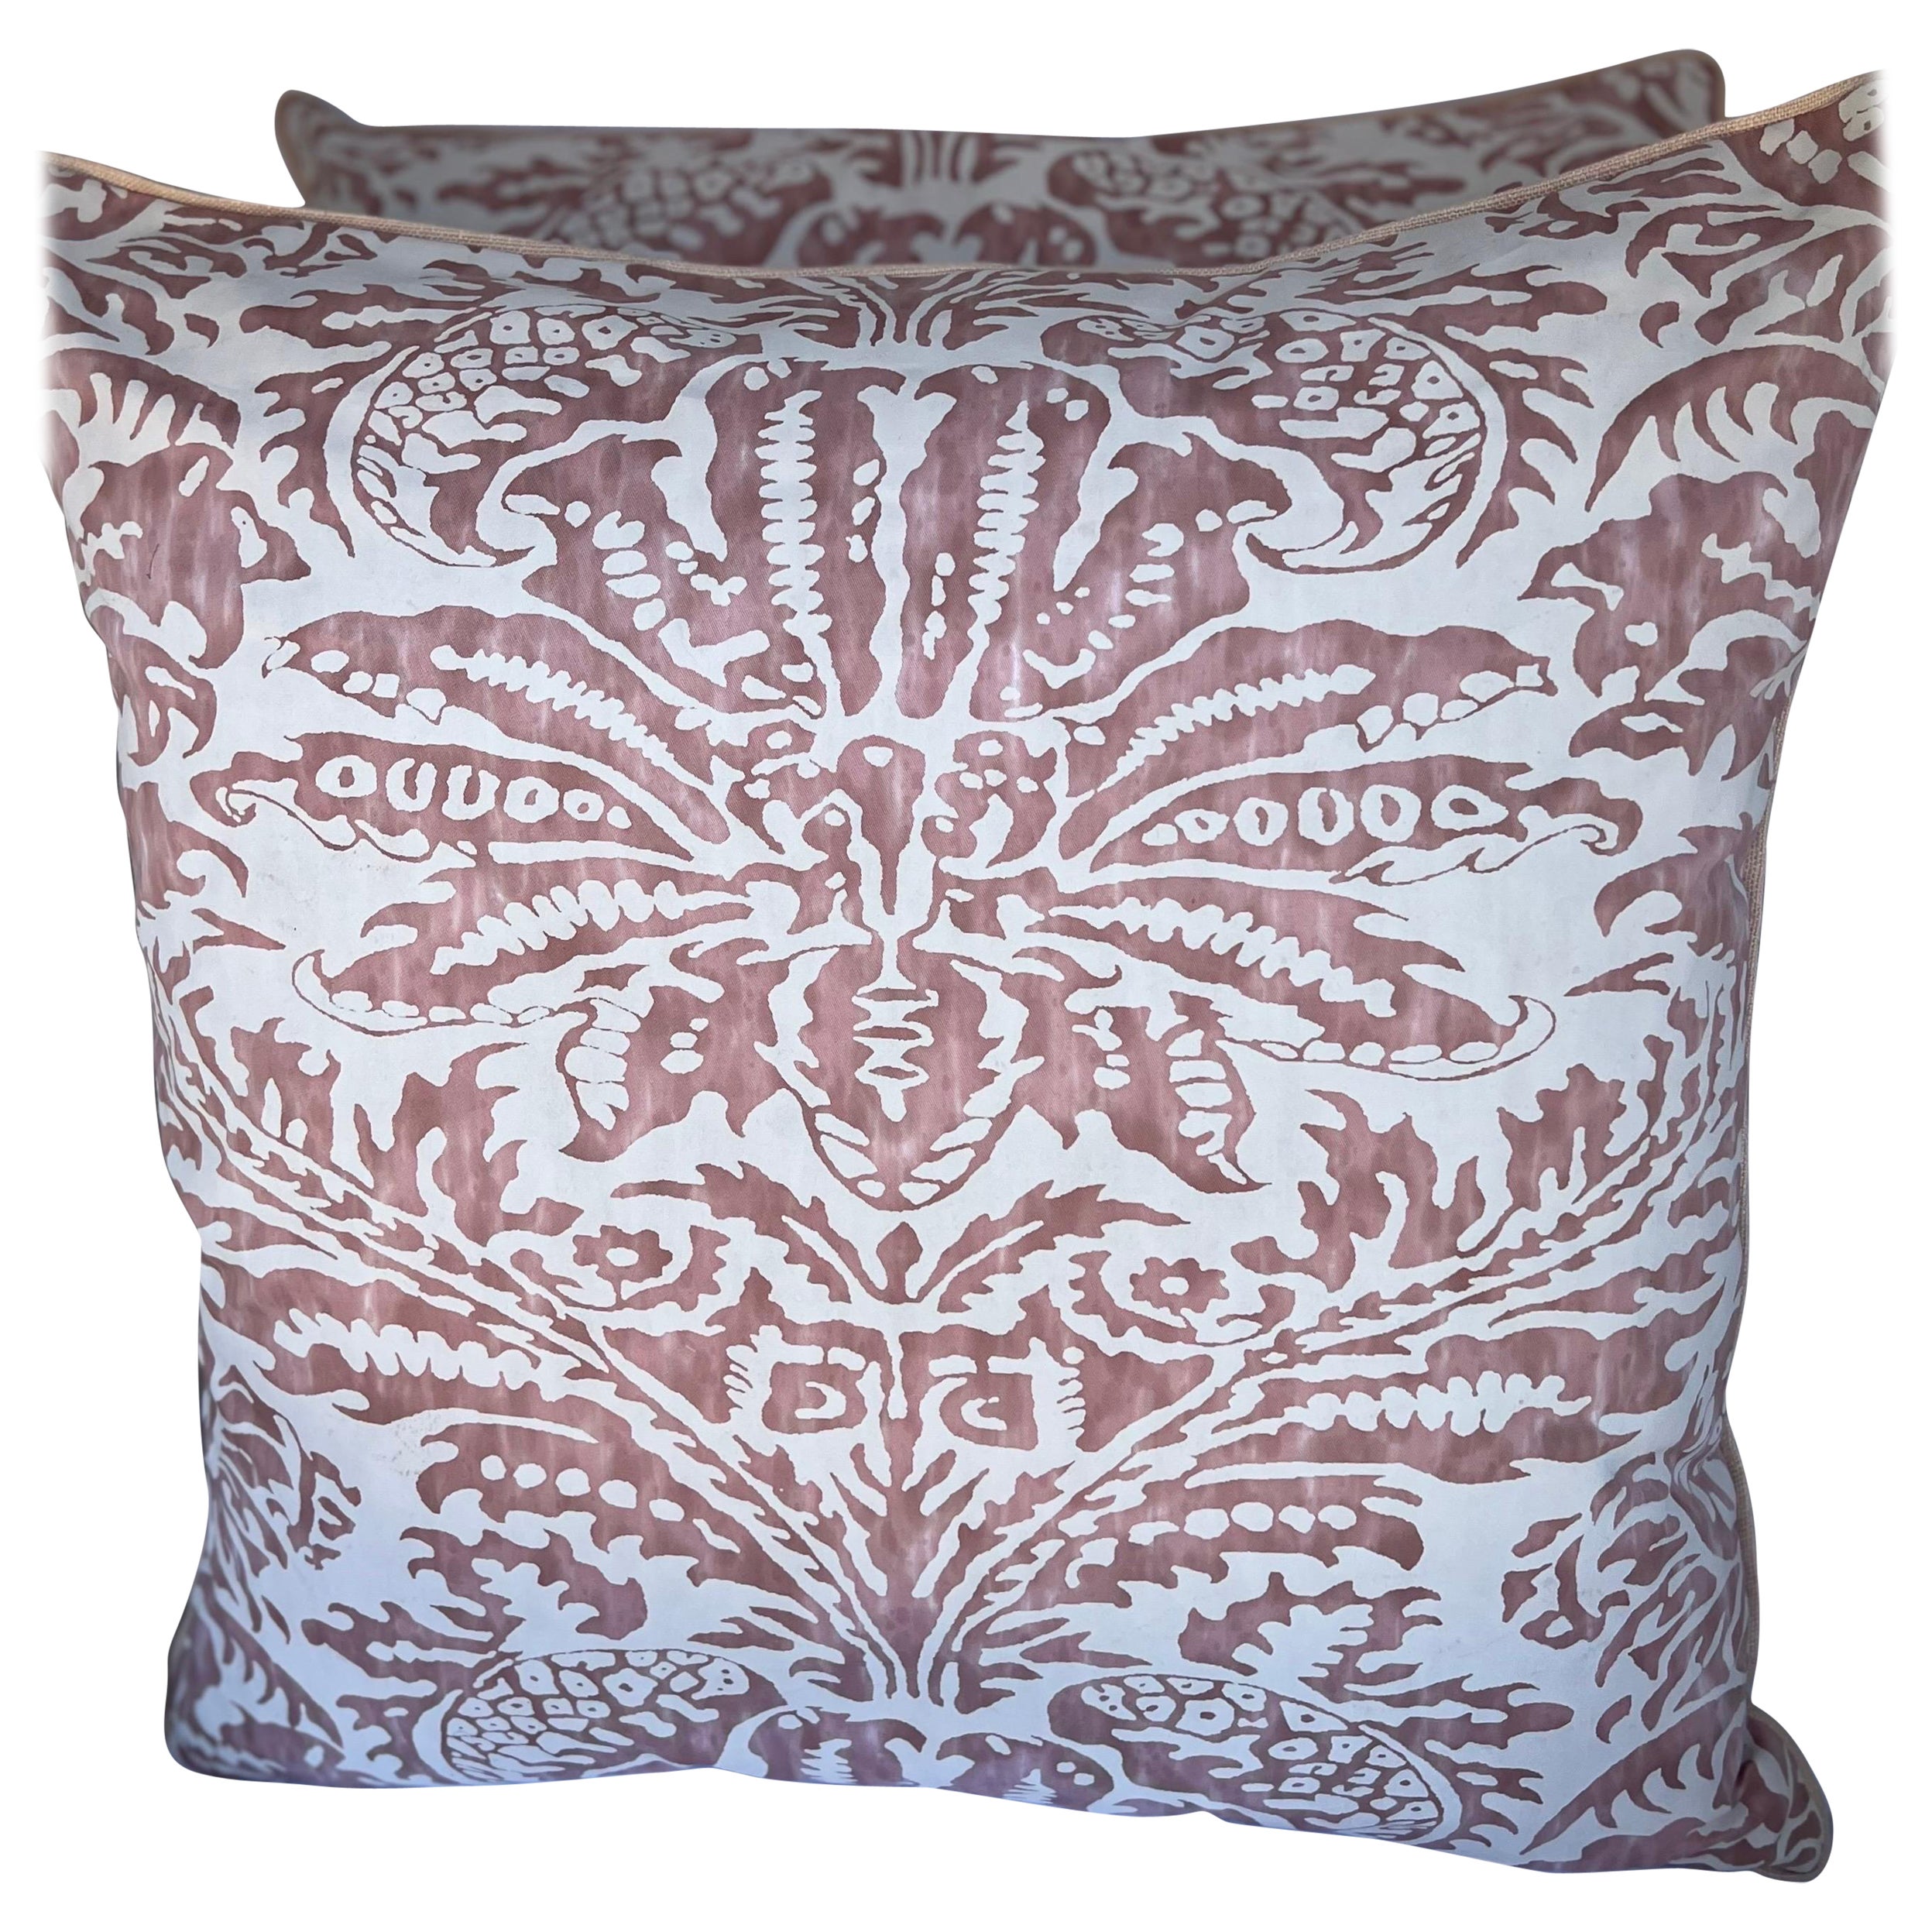 Pink & White Glicine Fortuny Patterned Textile Pillow